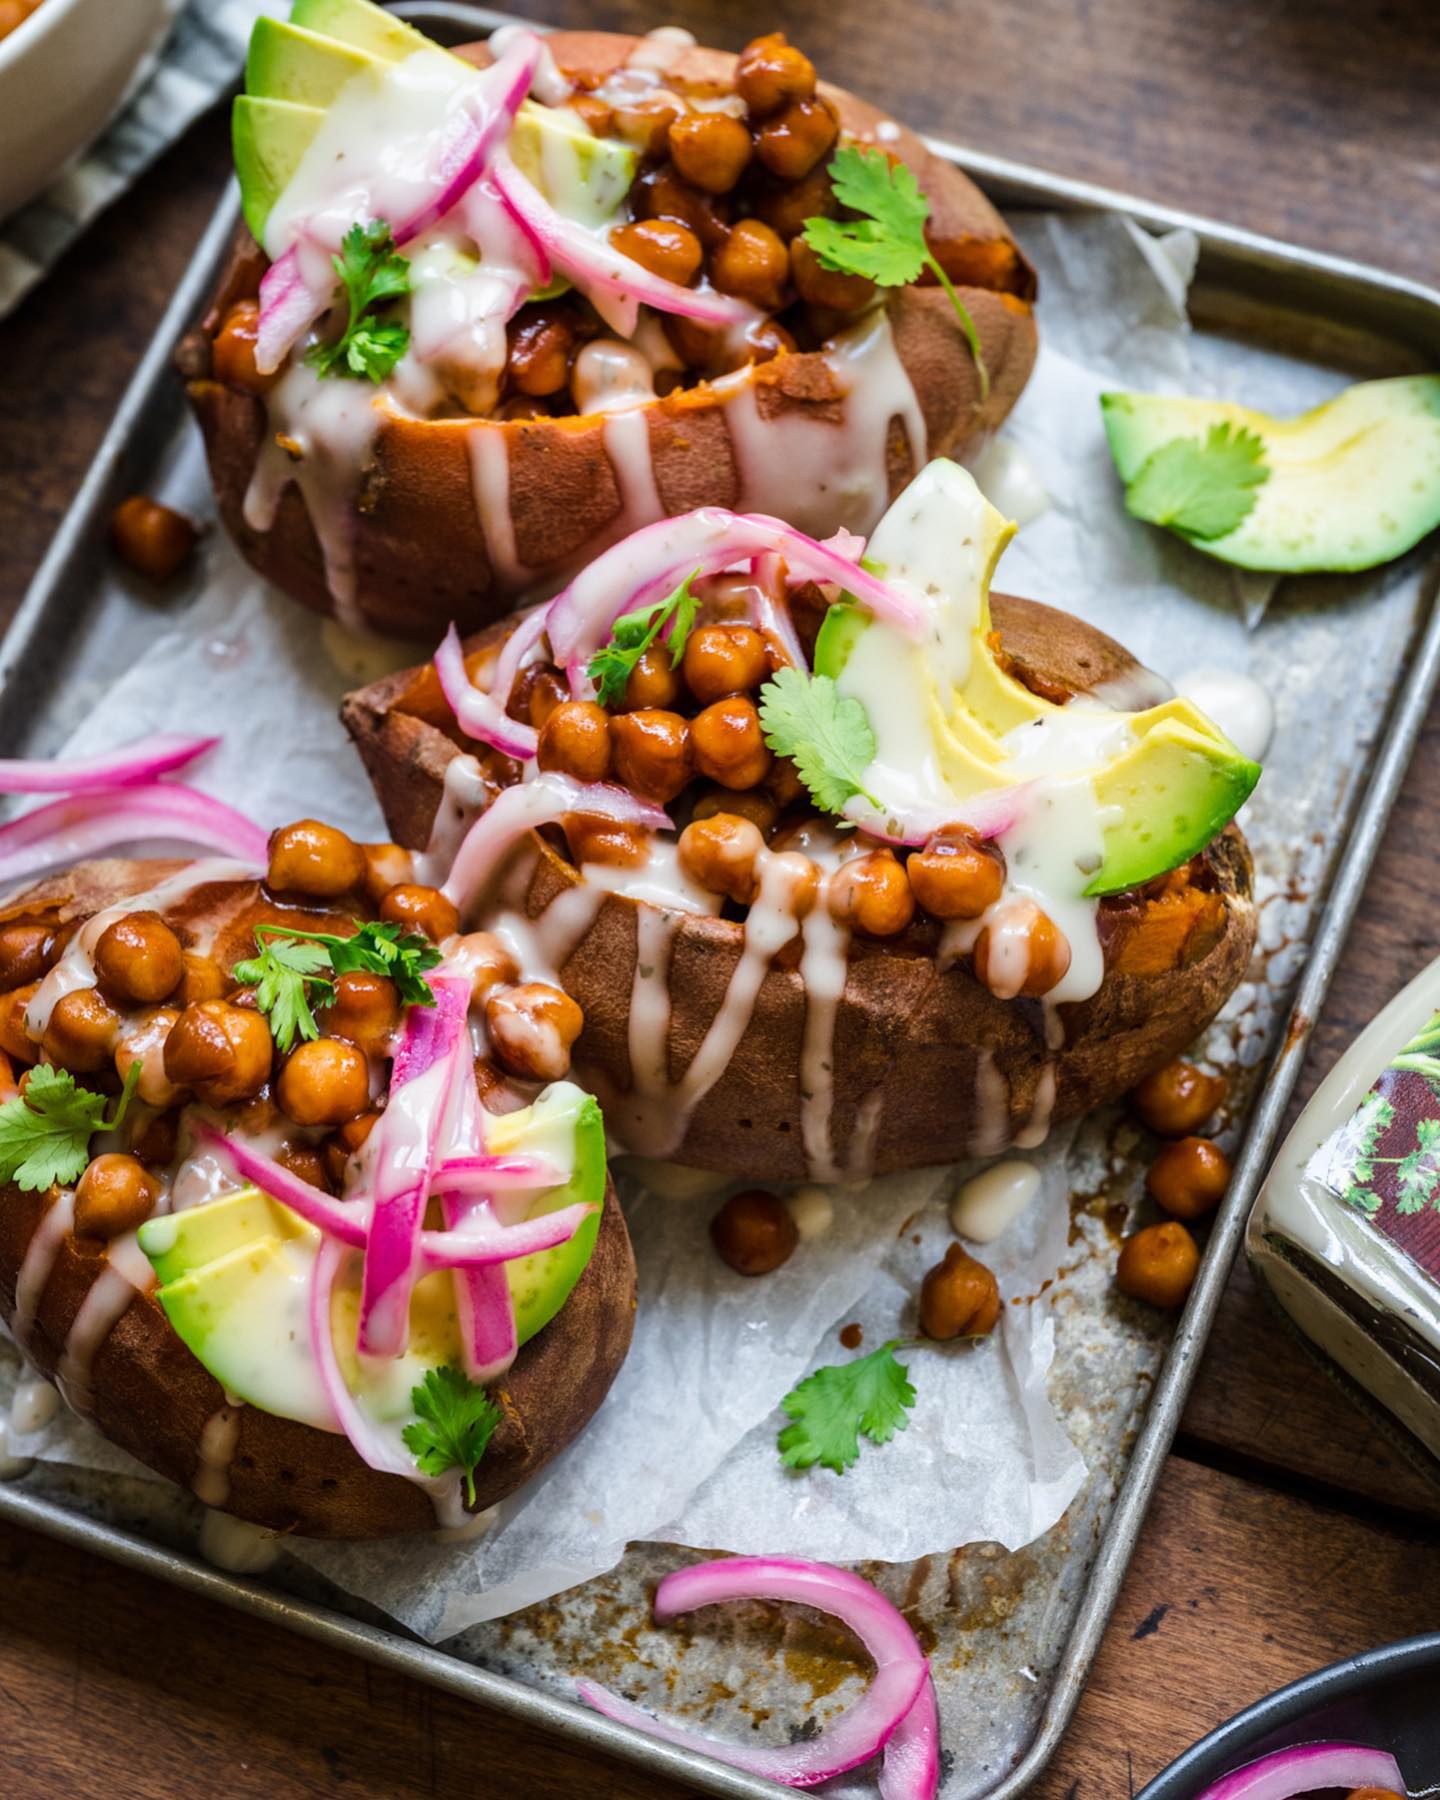 Bbq Chickpea Stuffed Sweet Potatoes with Non-Dairy Ranch Drizzle